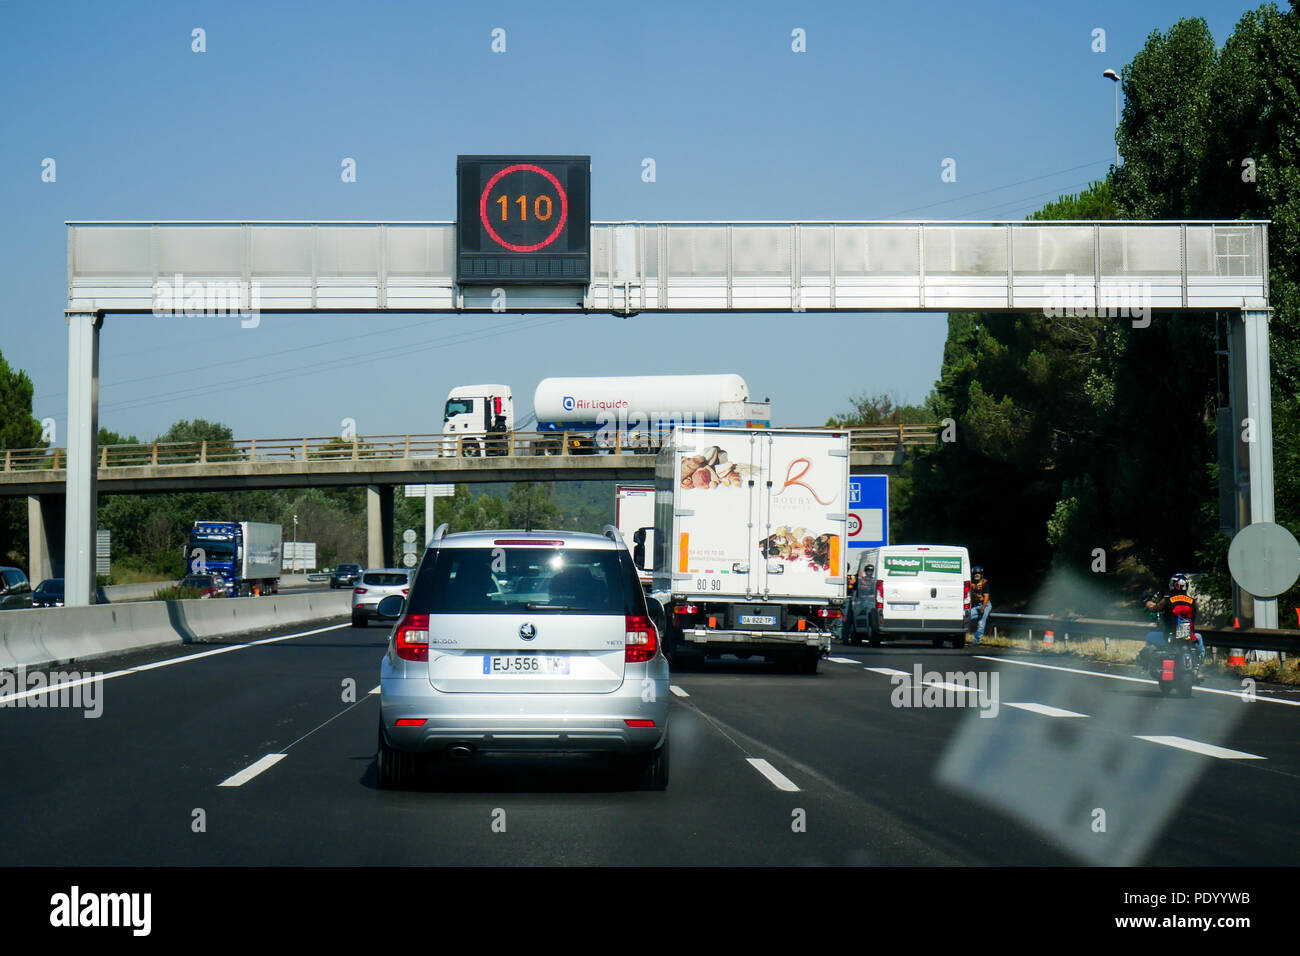 Driving on A7 highway - Autoroute du Soleil - illustration, Rhone Valley, France Stock Photo